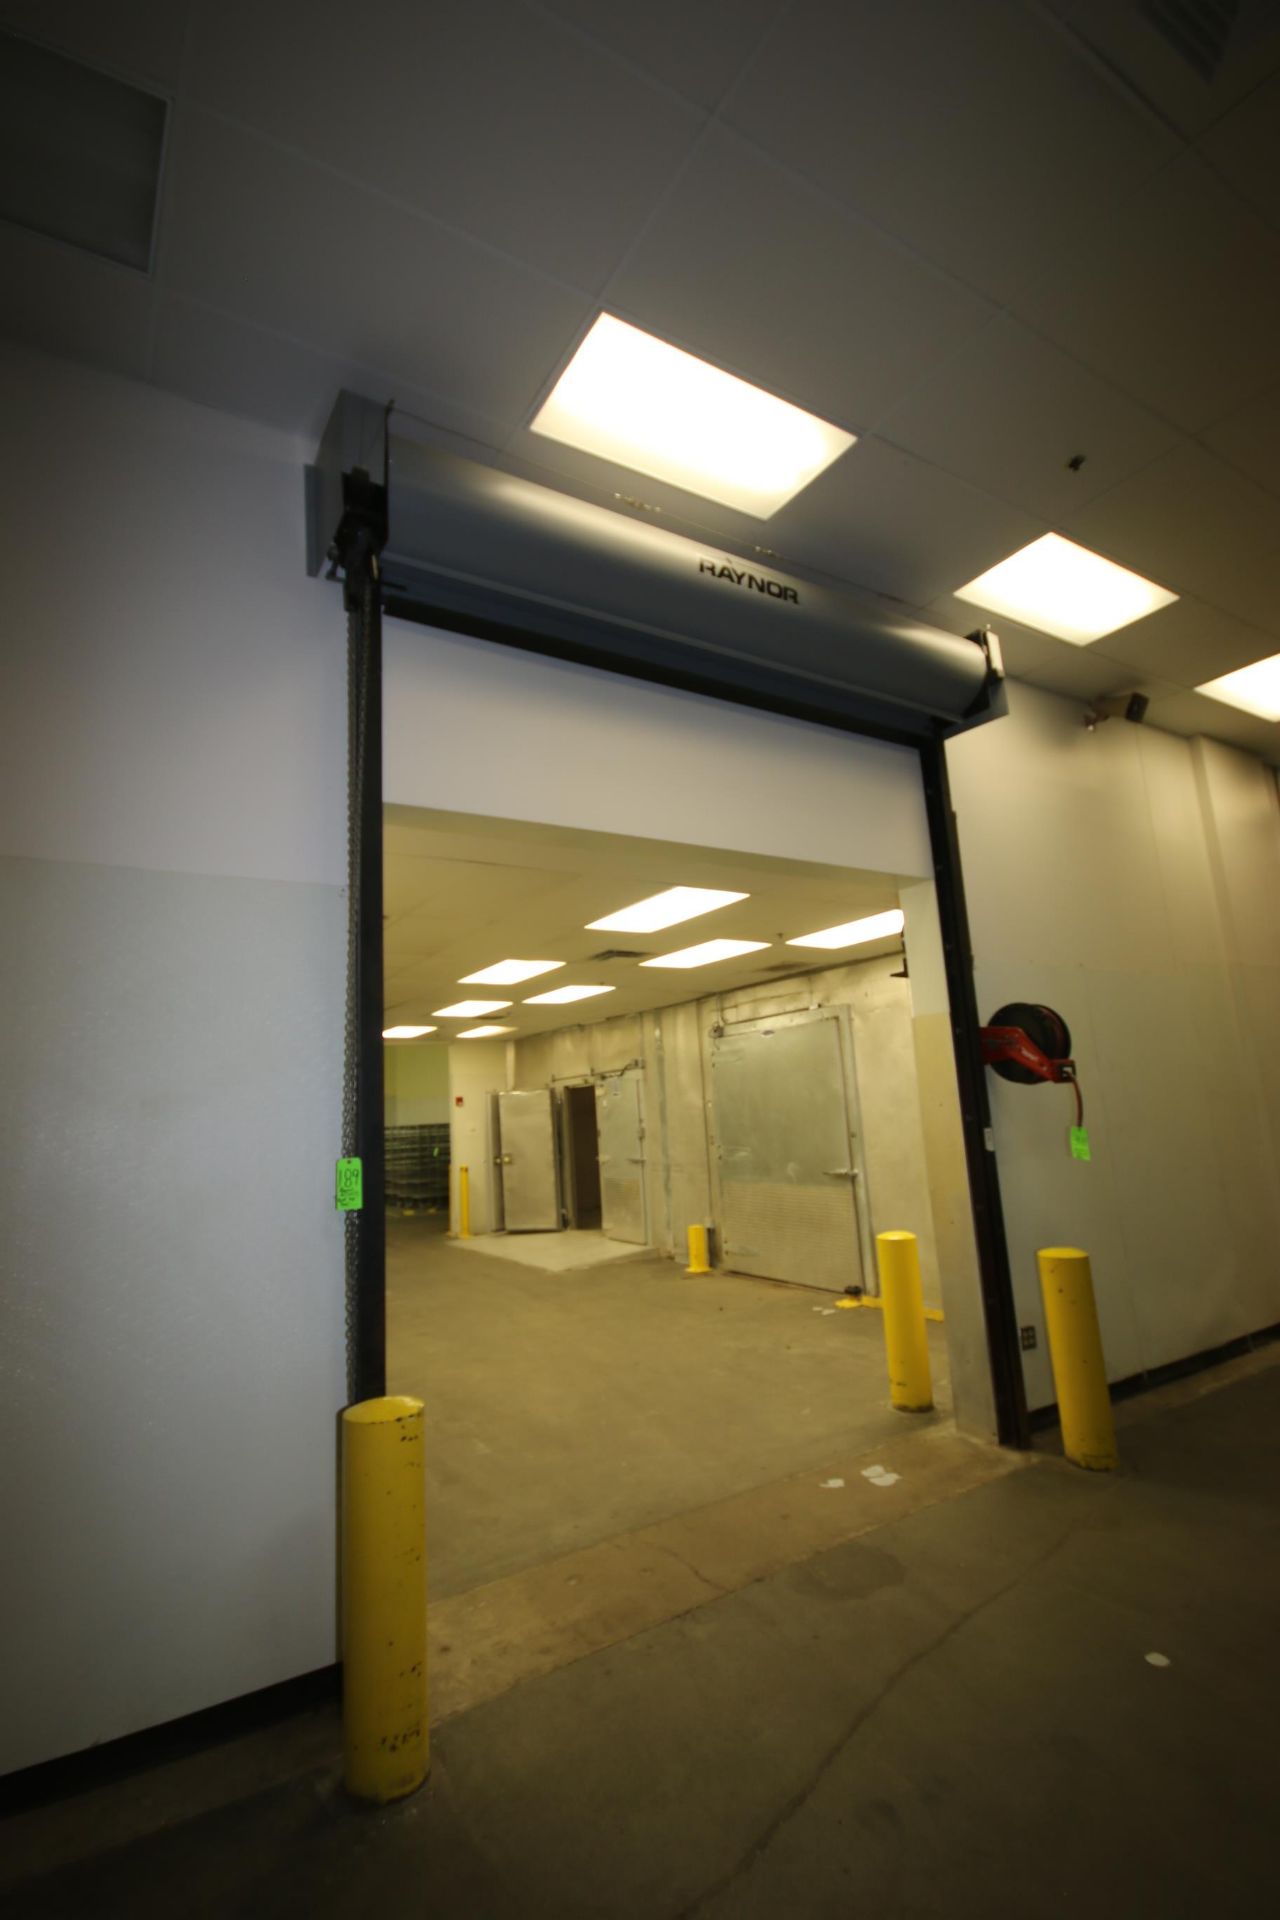 Raynor Manual Roll-Up Door, Dimensions: Aprox. 12' H x 10' W, with Door Framing (LOCATED AT BAKE